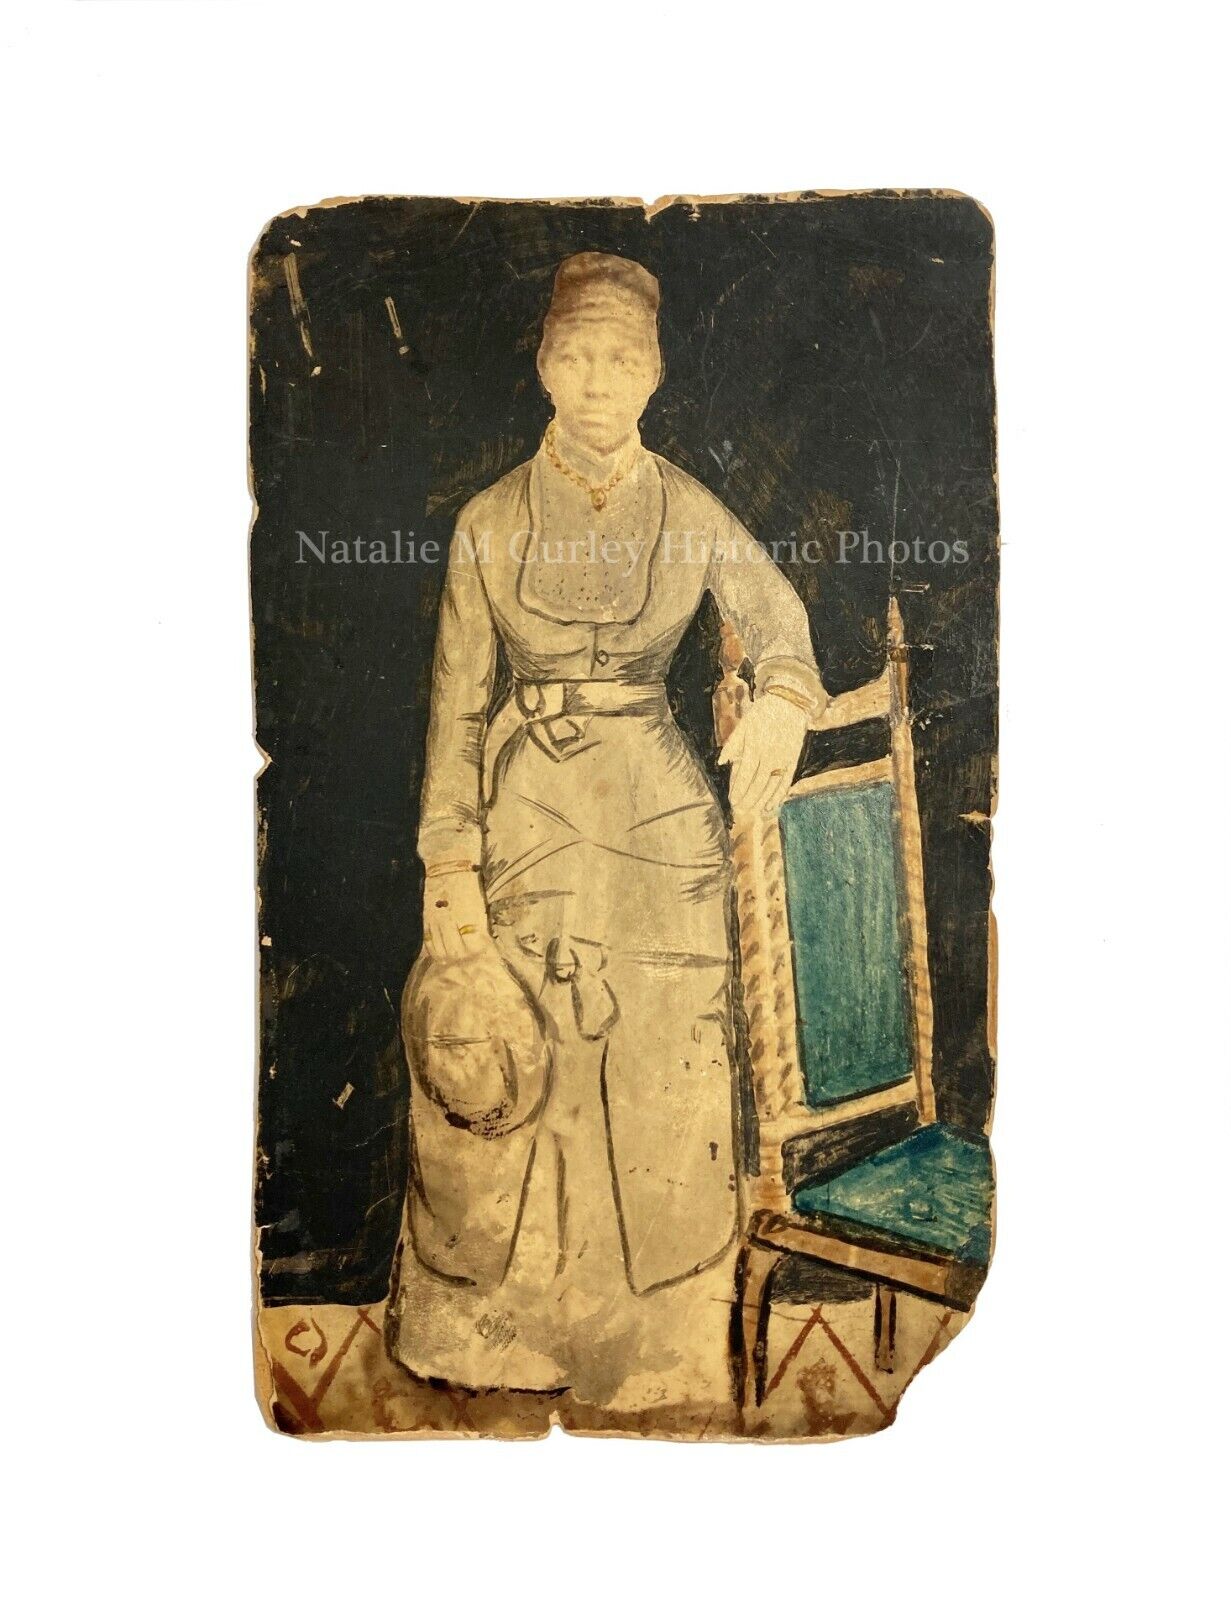 19thc African American Woman Painted Studio Photo